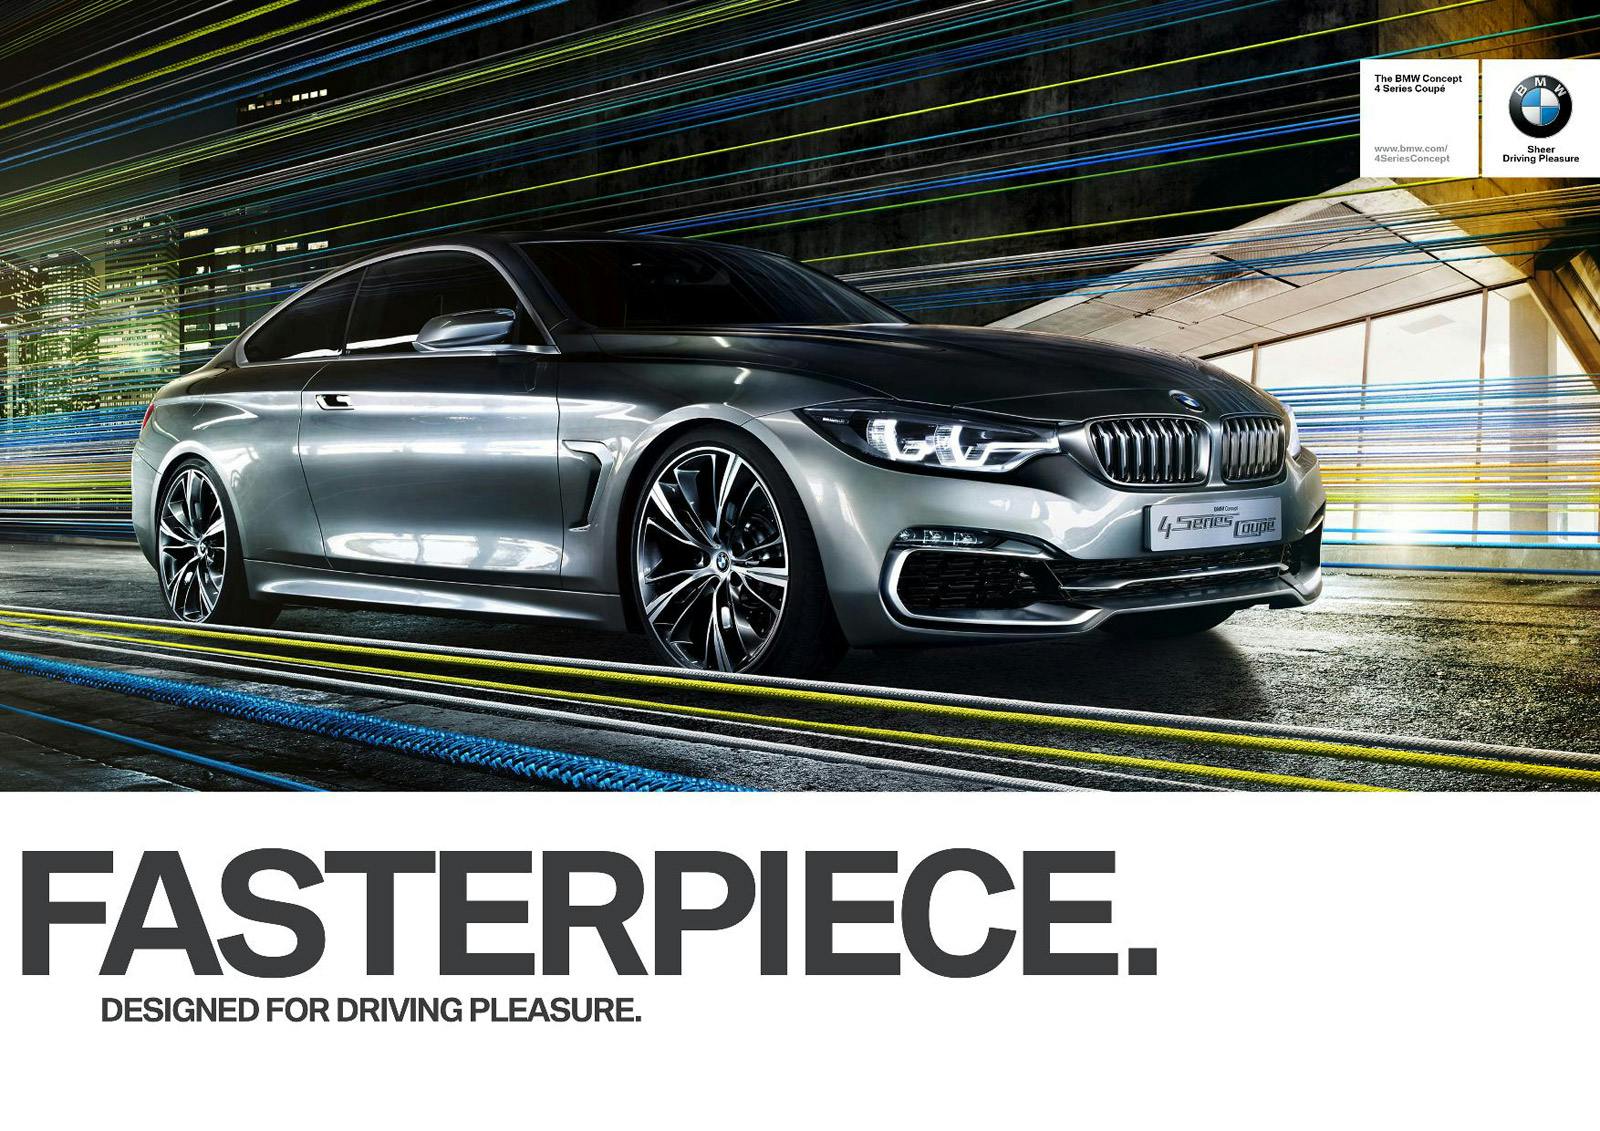 A poster with a BMW car and the 'Fasterpiece' and 'Sheer Driving Pleasure' slogans.